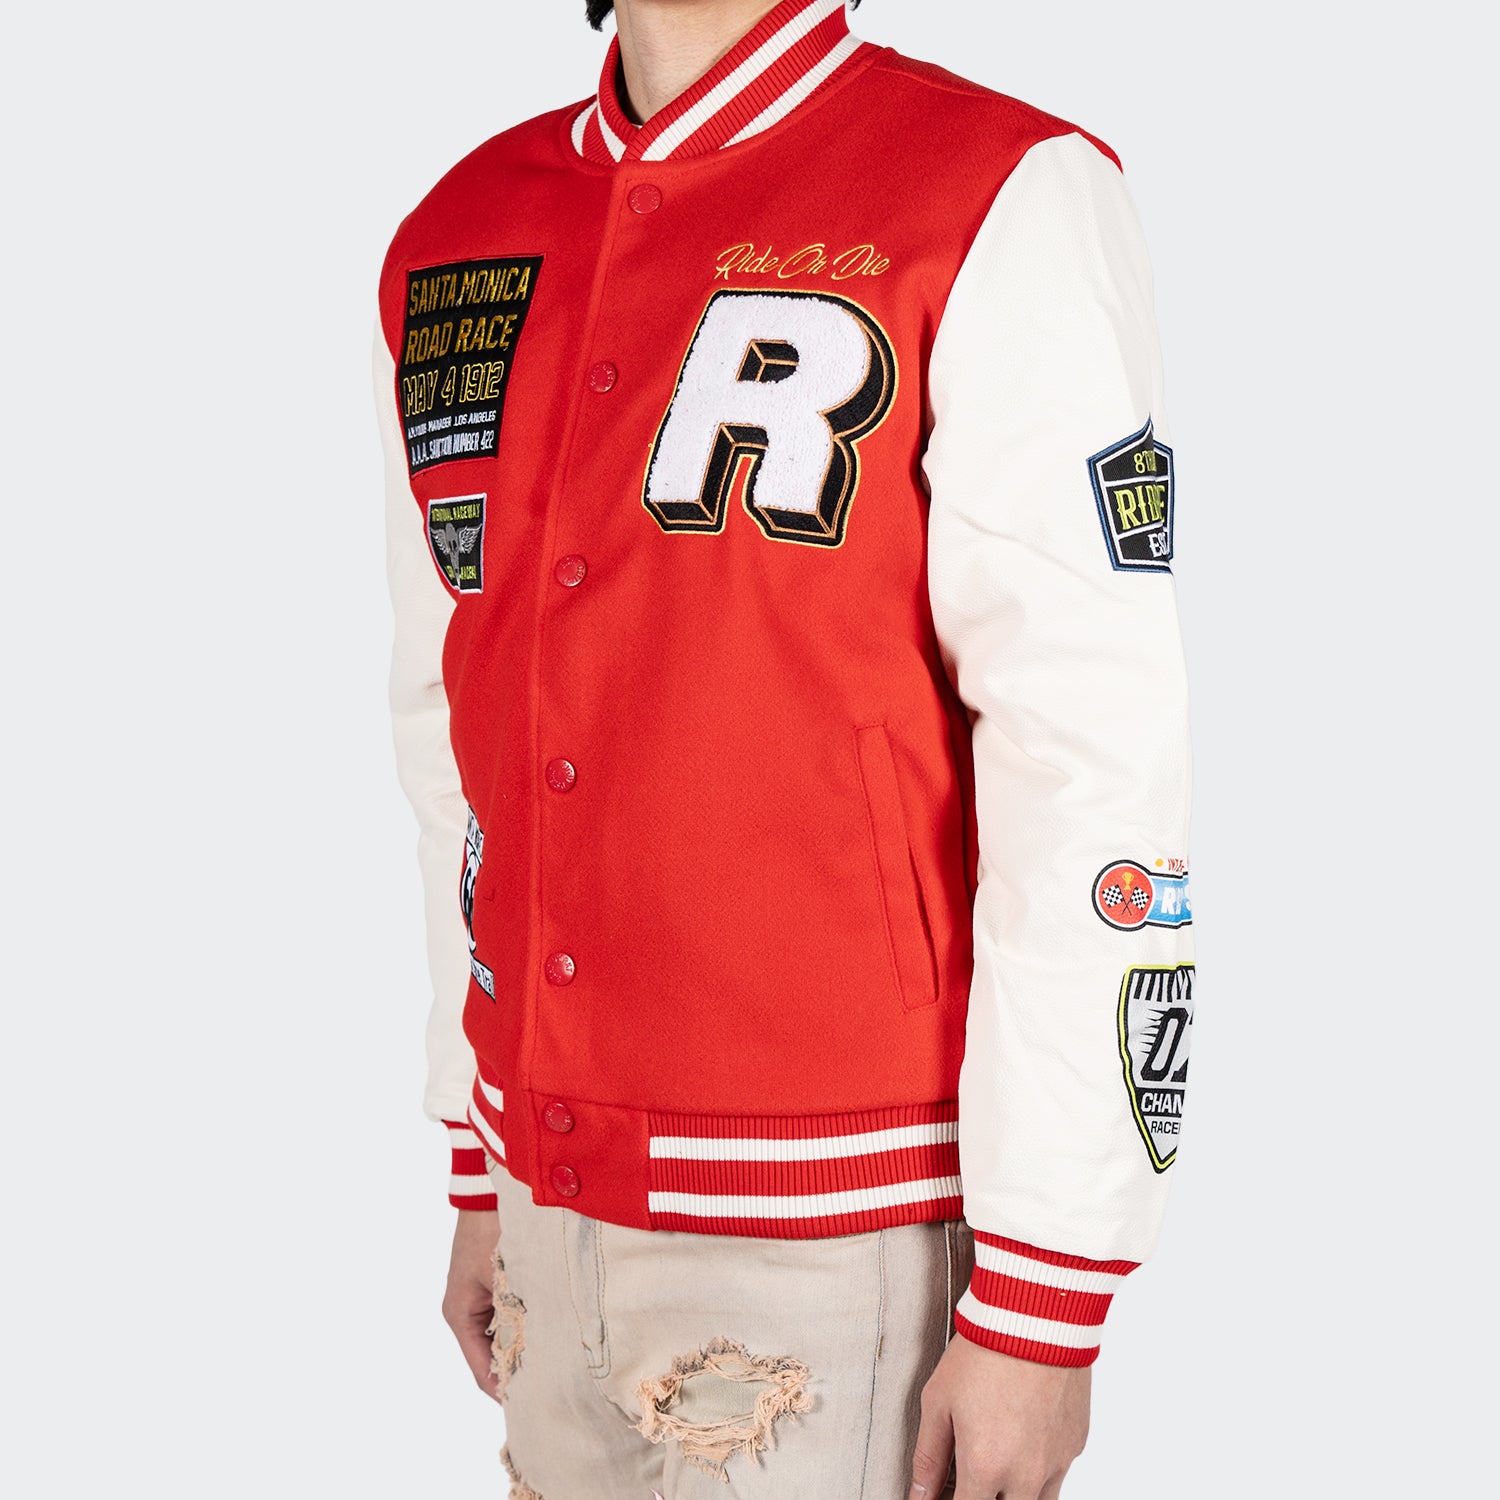 TMTY Chicago Jacket Red | Varsity Sports Race Die or Ride City Road